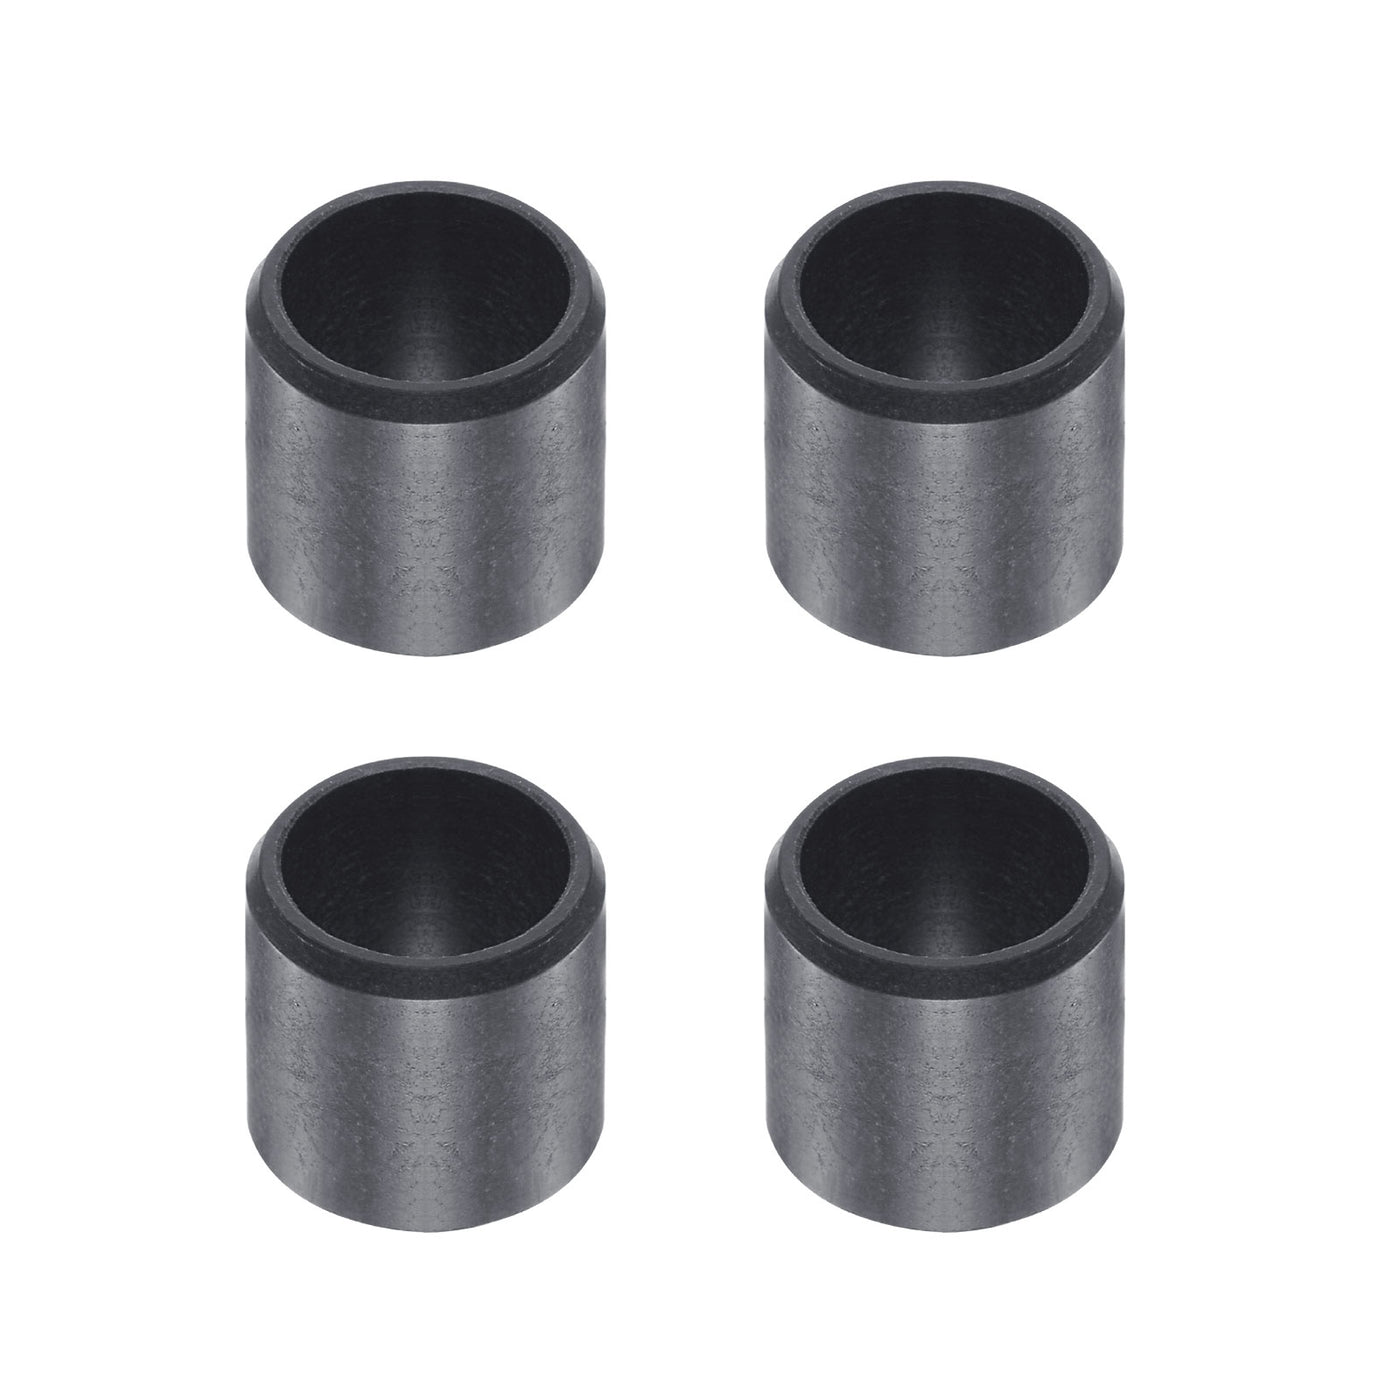 uxcell Uxcell Sleeve Bearings 8mmx10mmx8mm POM Wrapped Oilless Bushings Black 4pcs